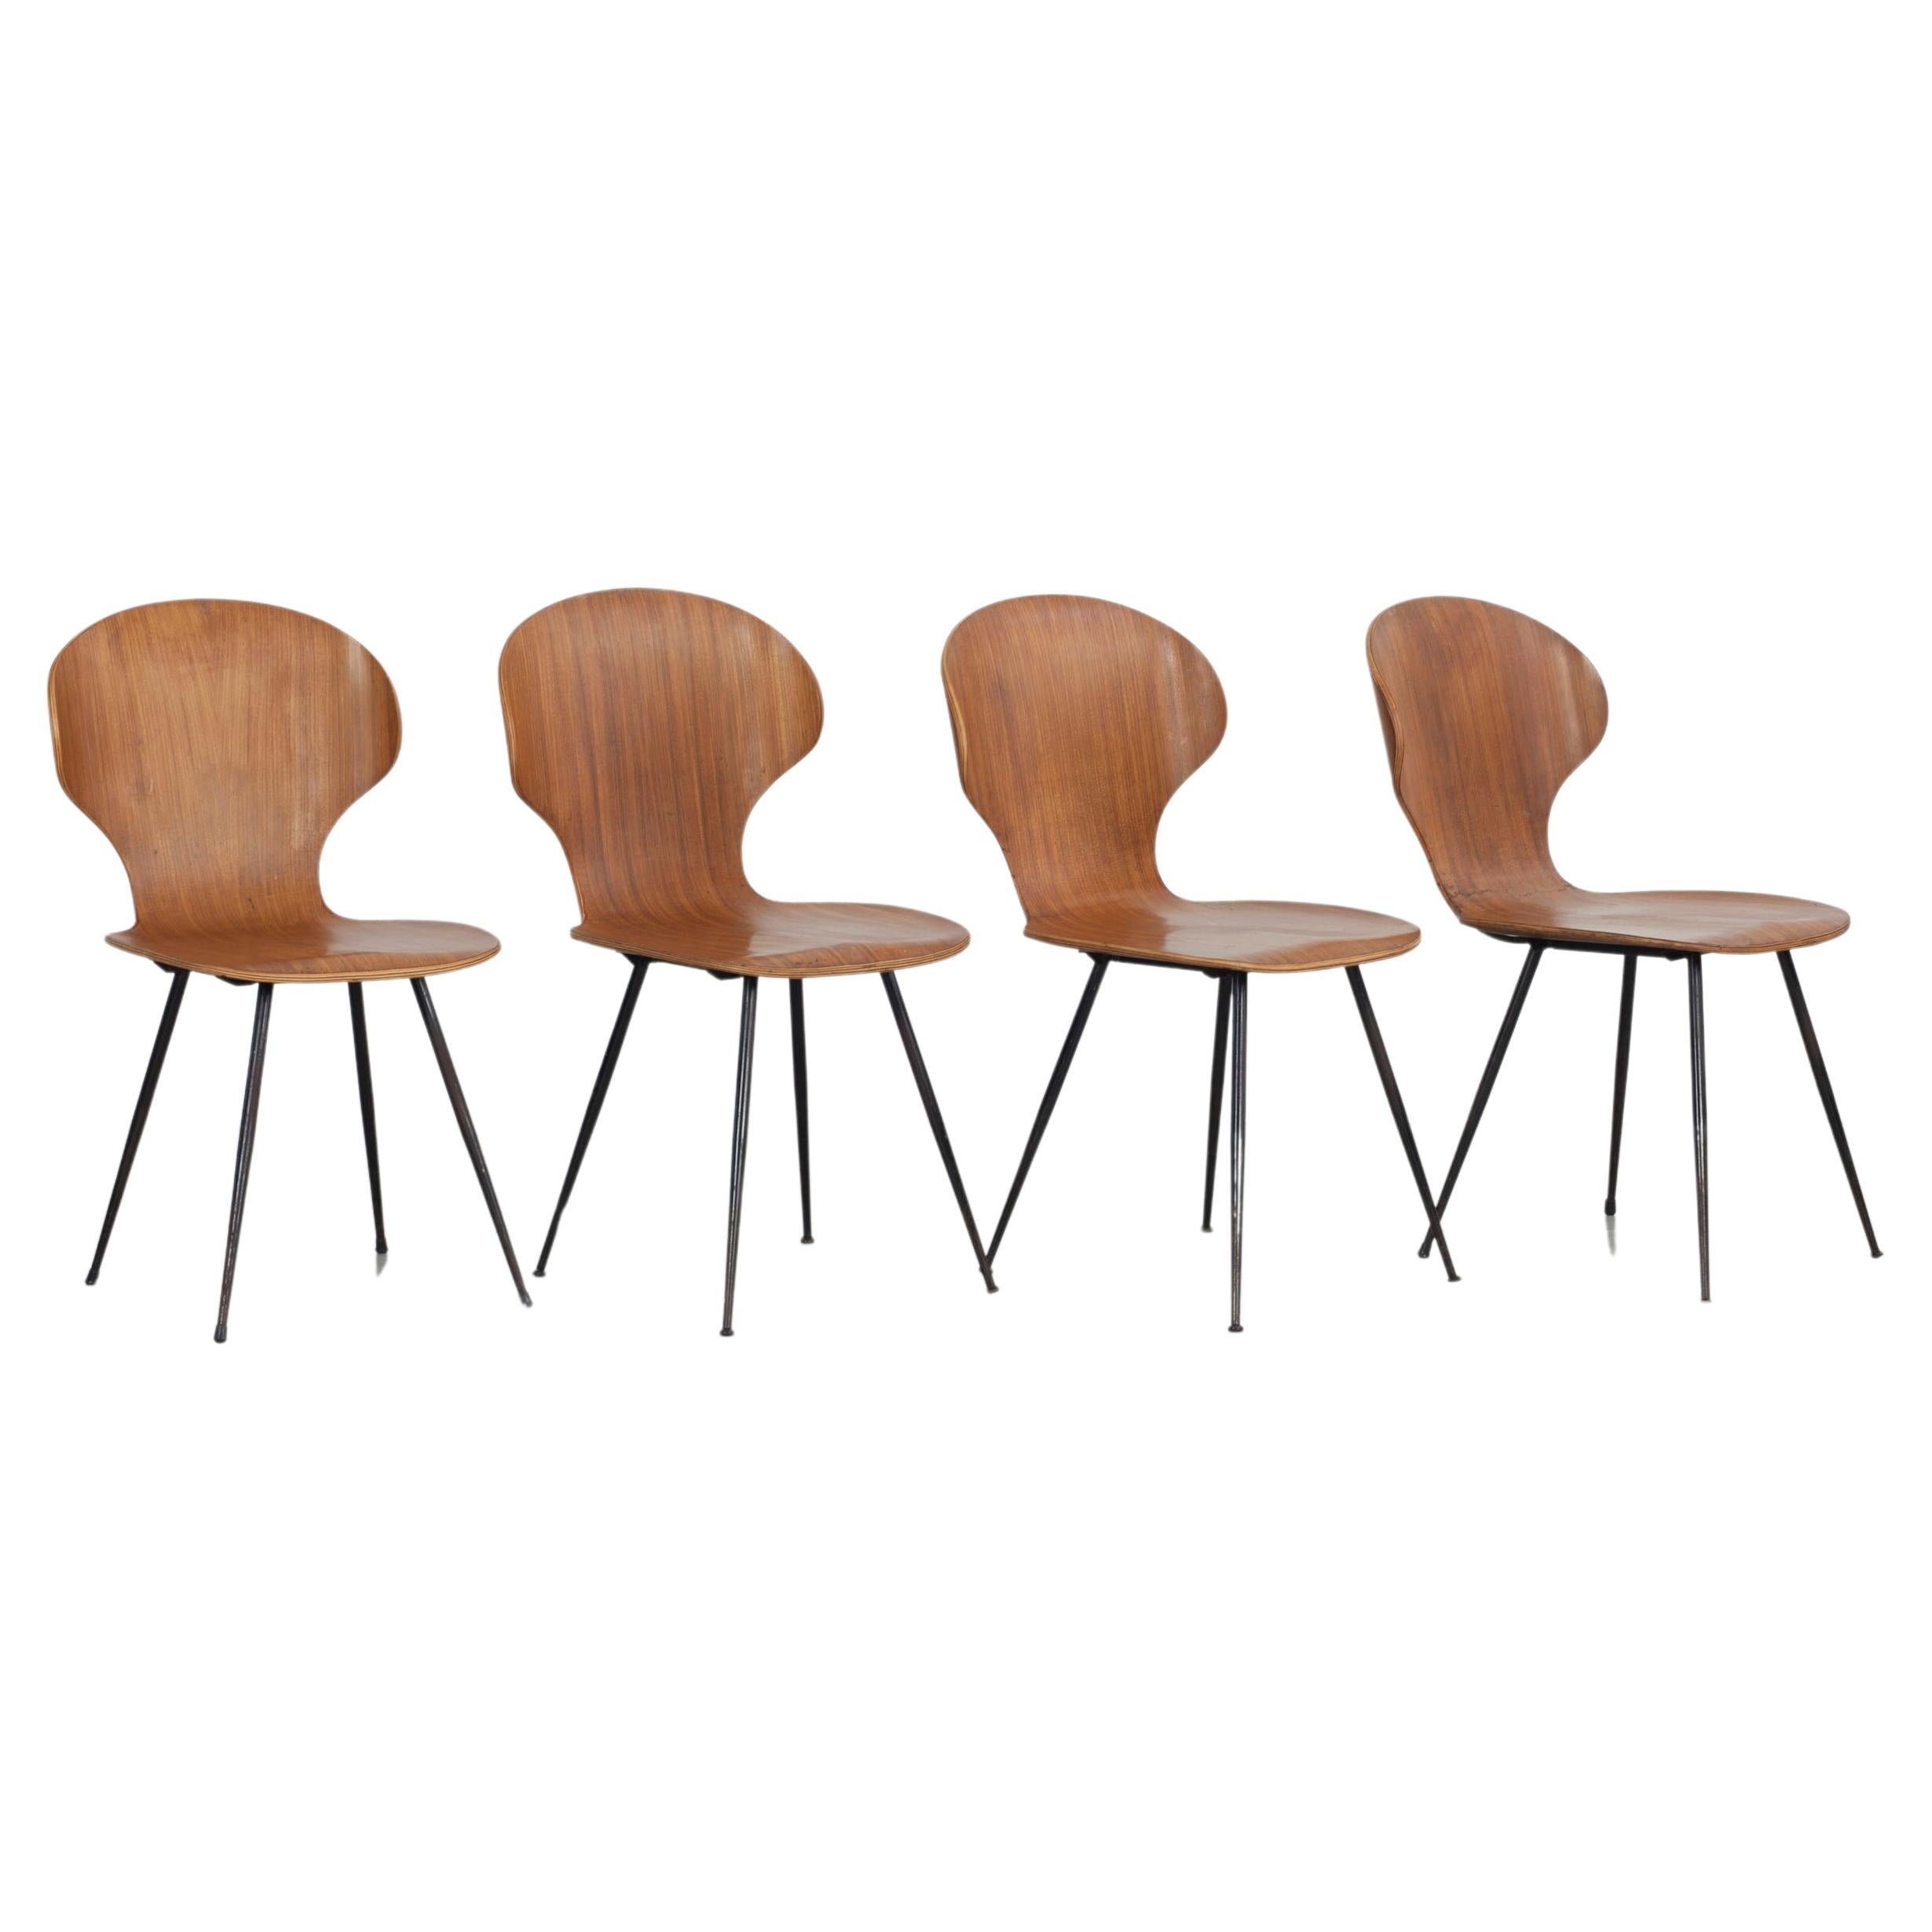 Set of 4 Bentwood chairs by Carlo Ratti, Industria Legni Curvati, Italy  1950s. For Sale